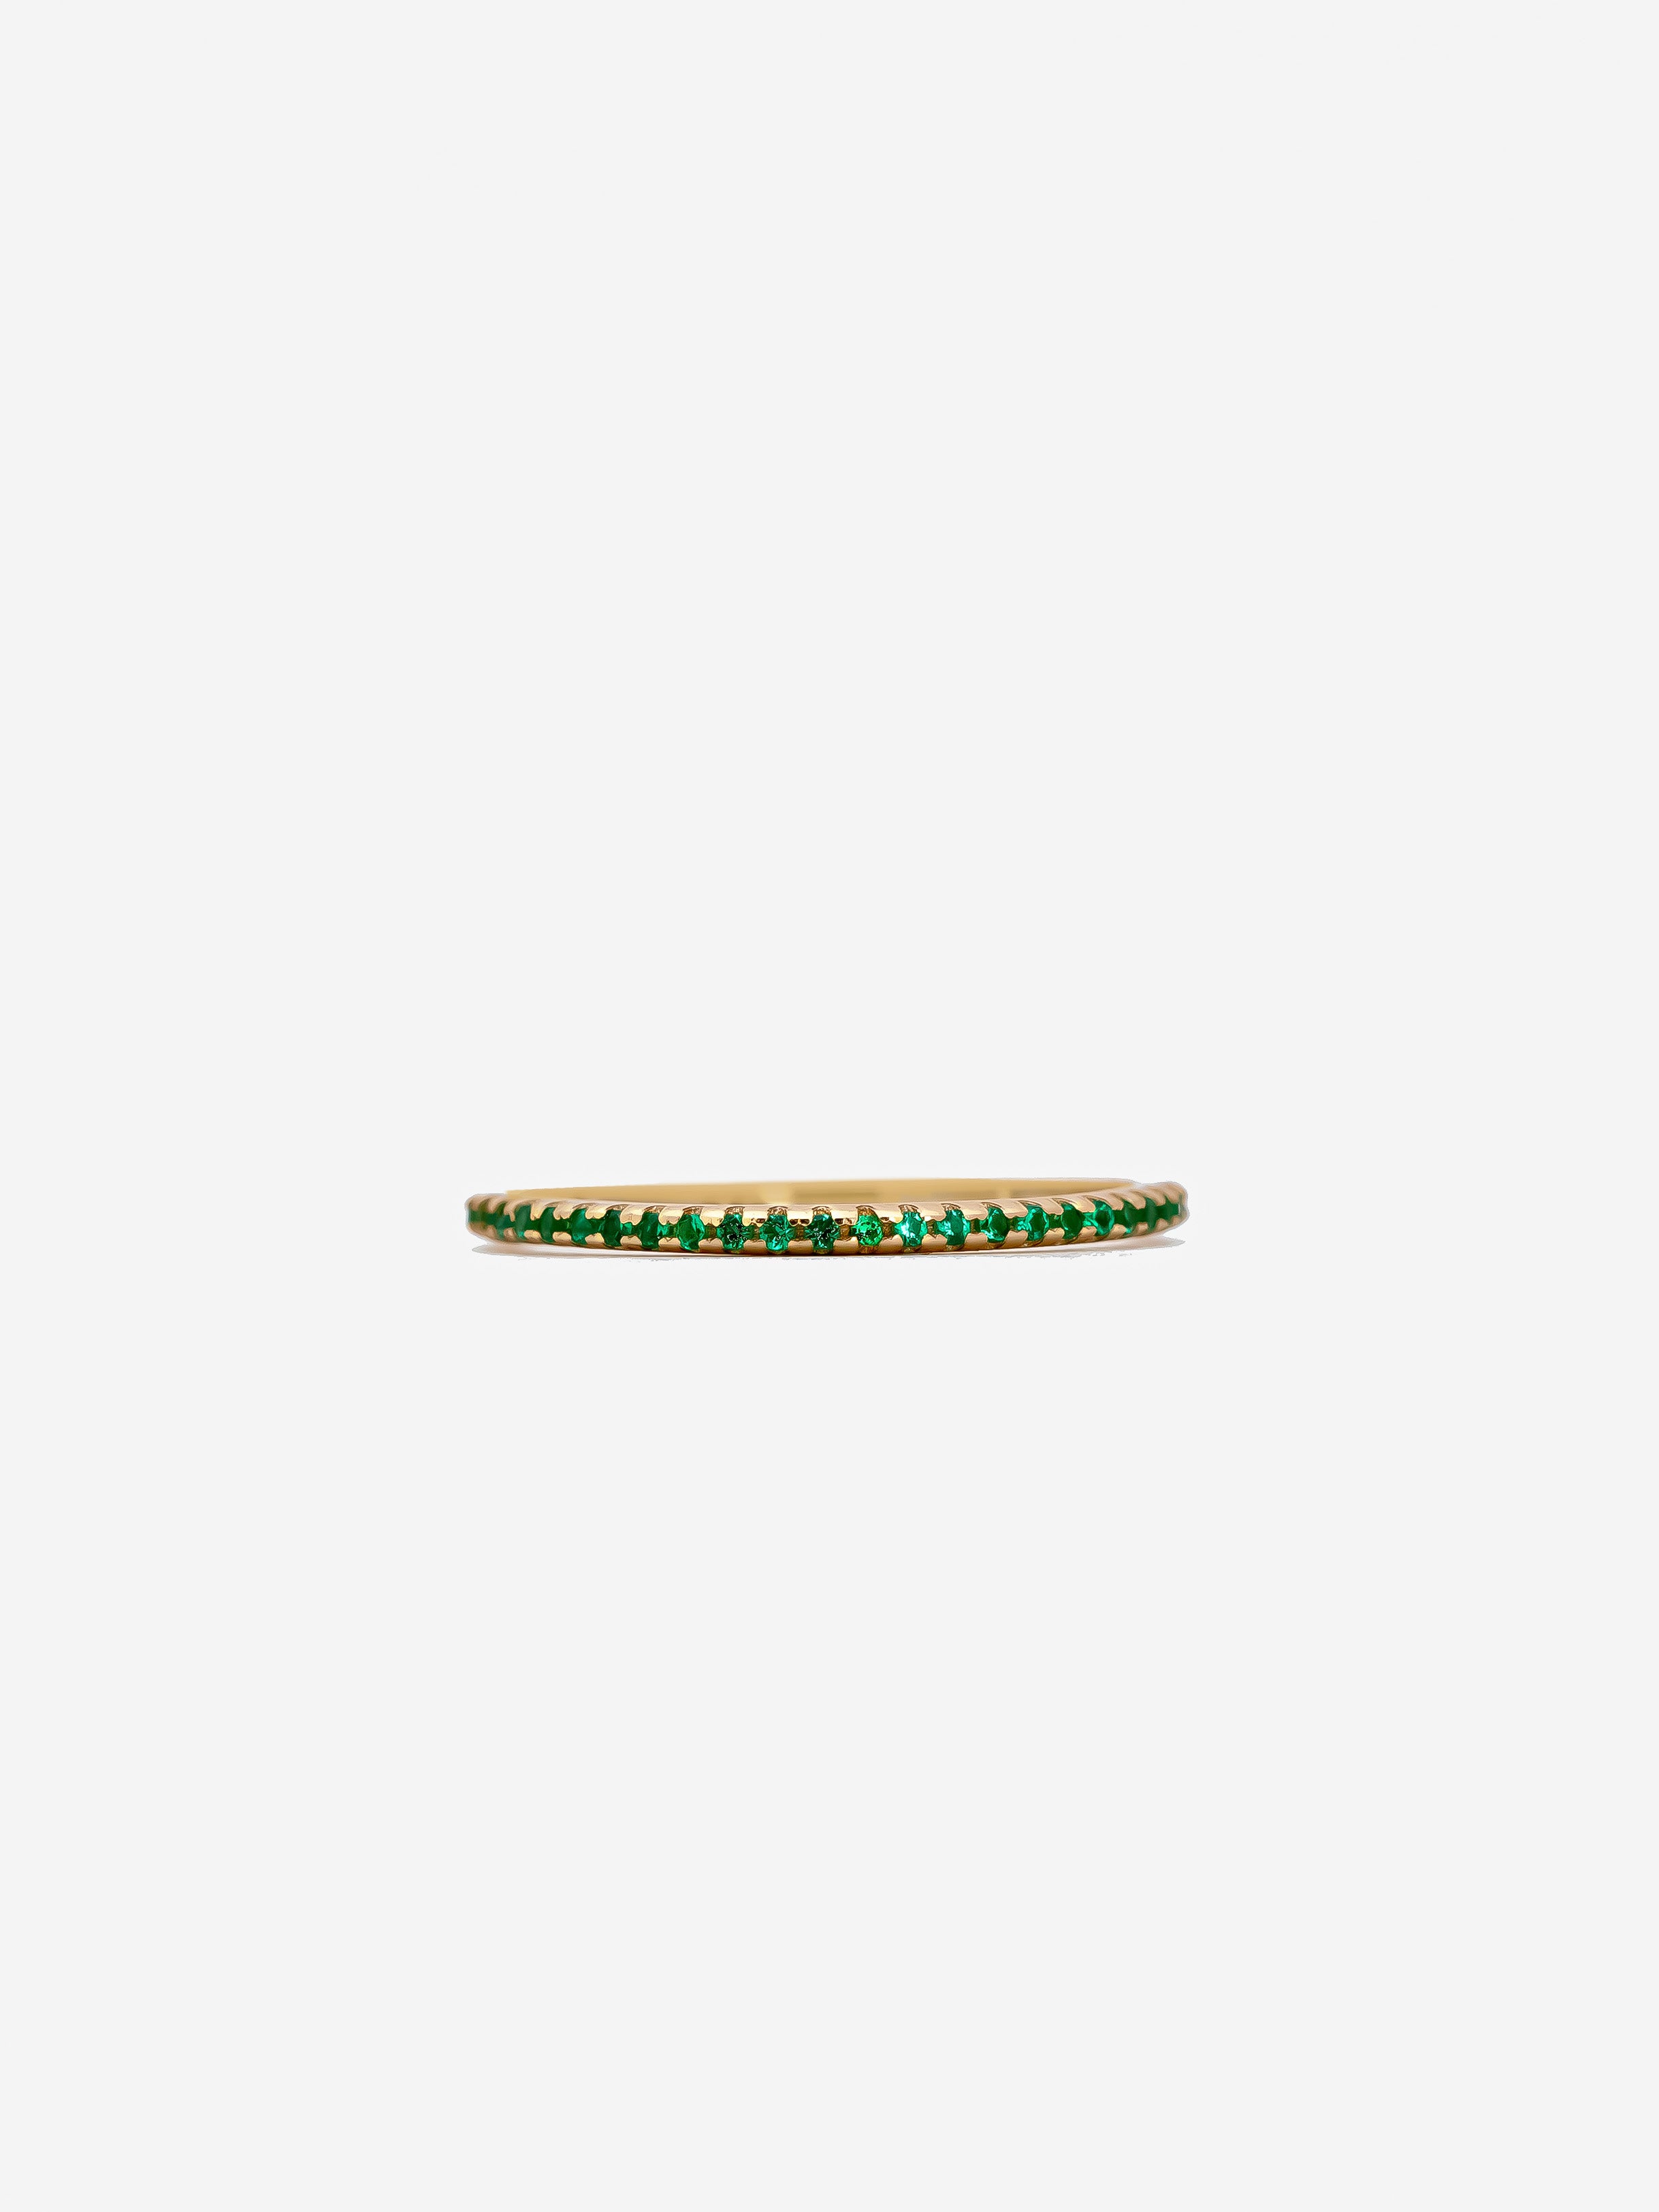 Gold Stacking Ring With Onyx Green Stones